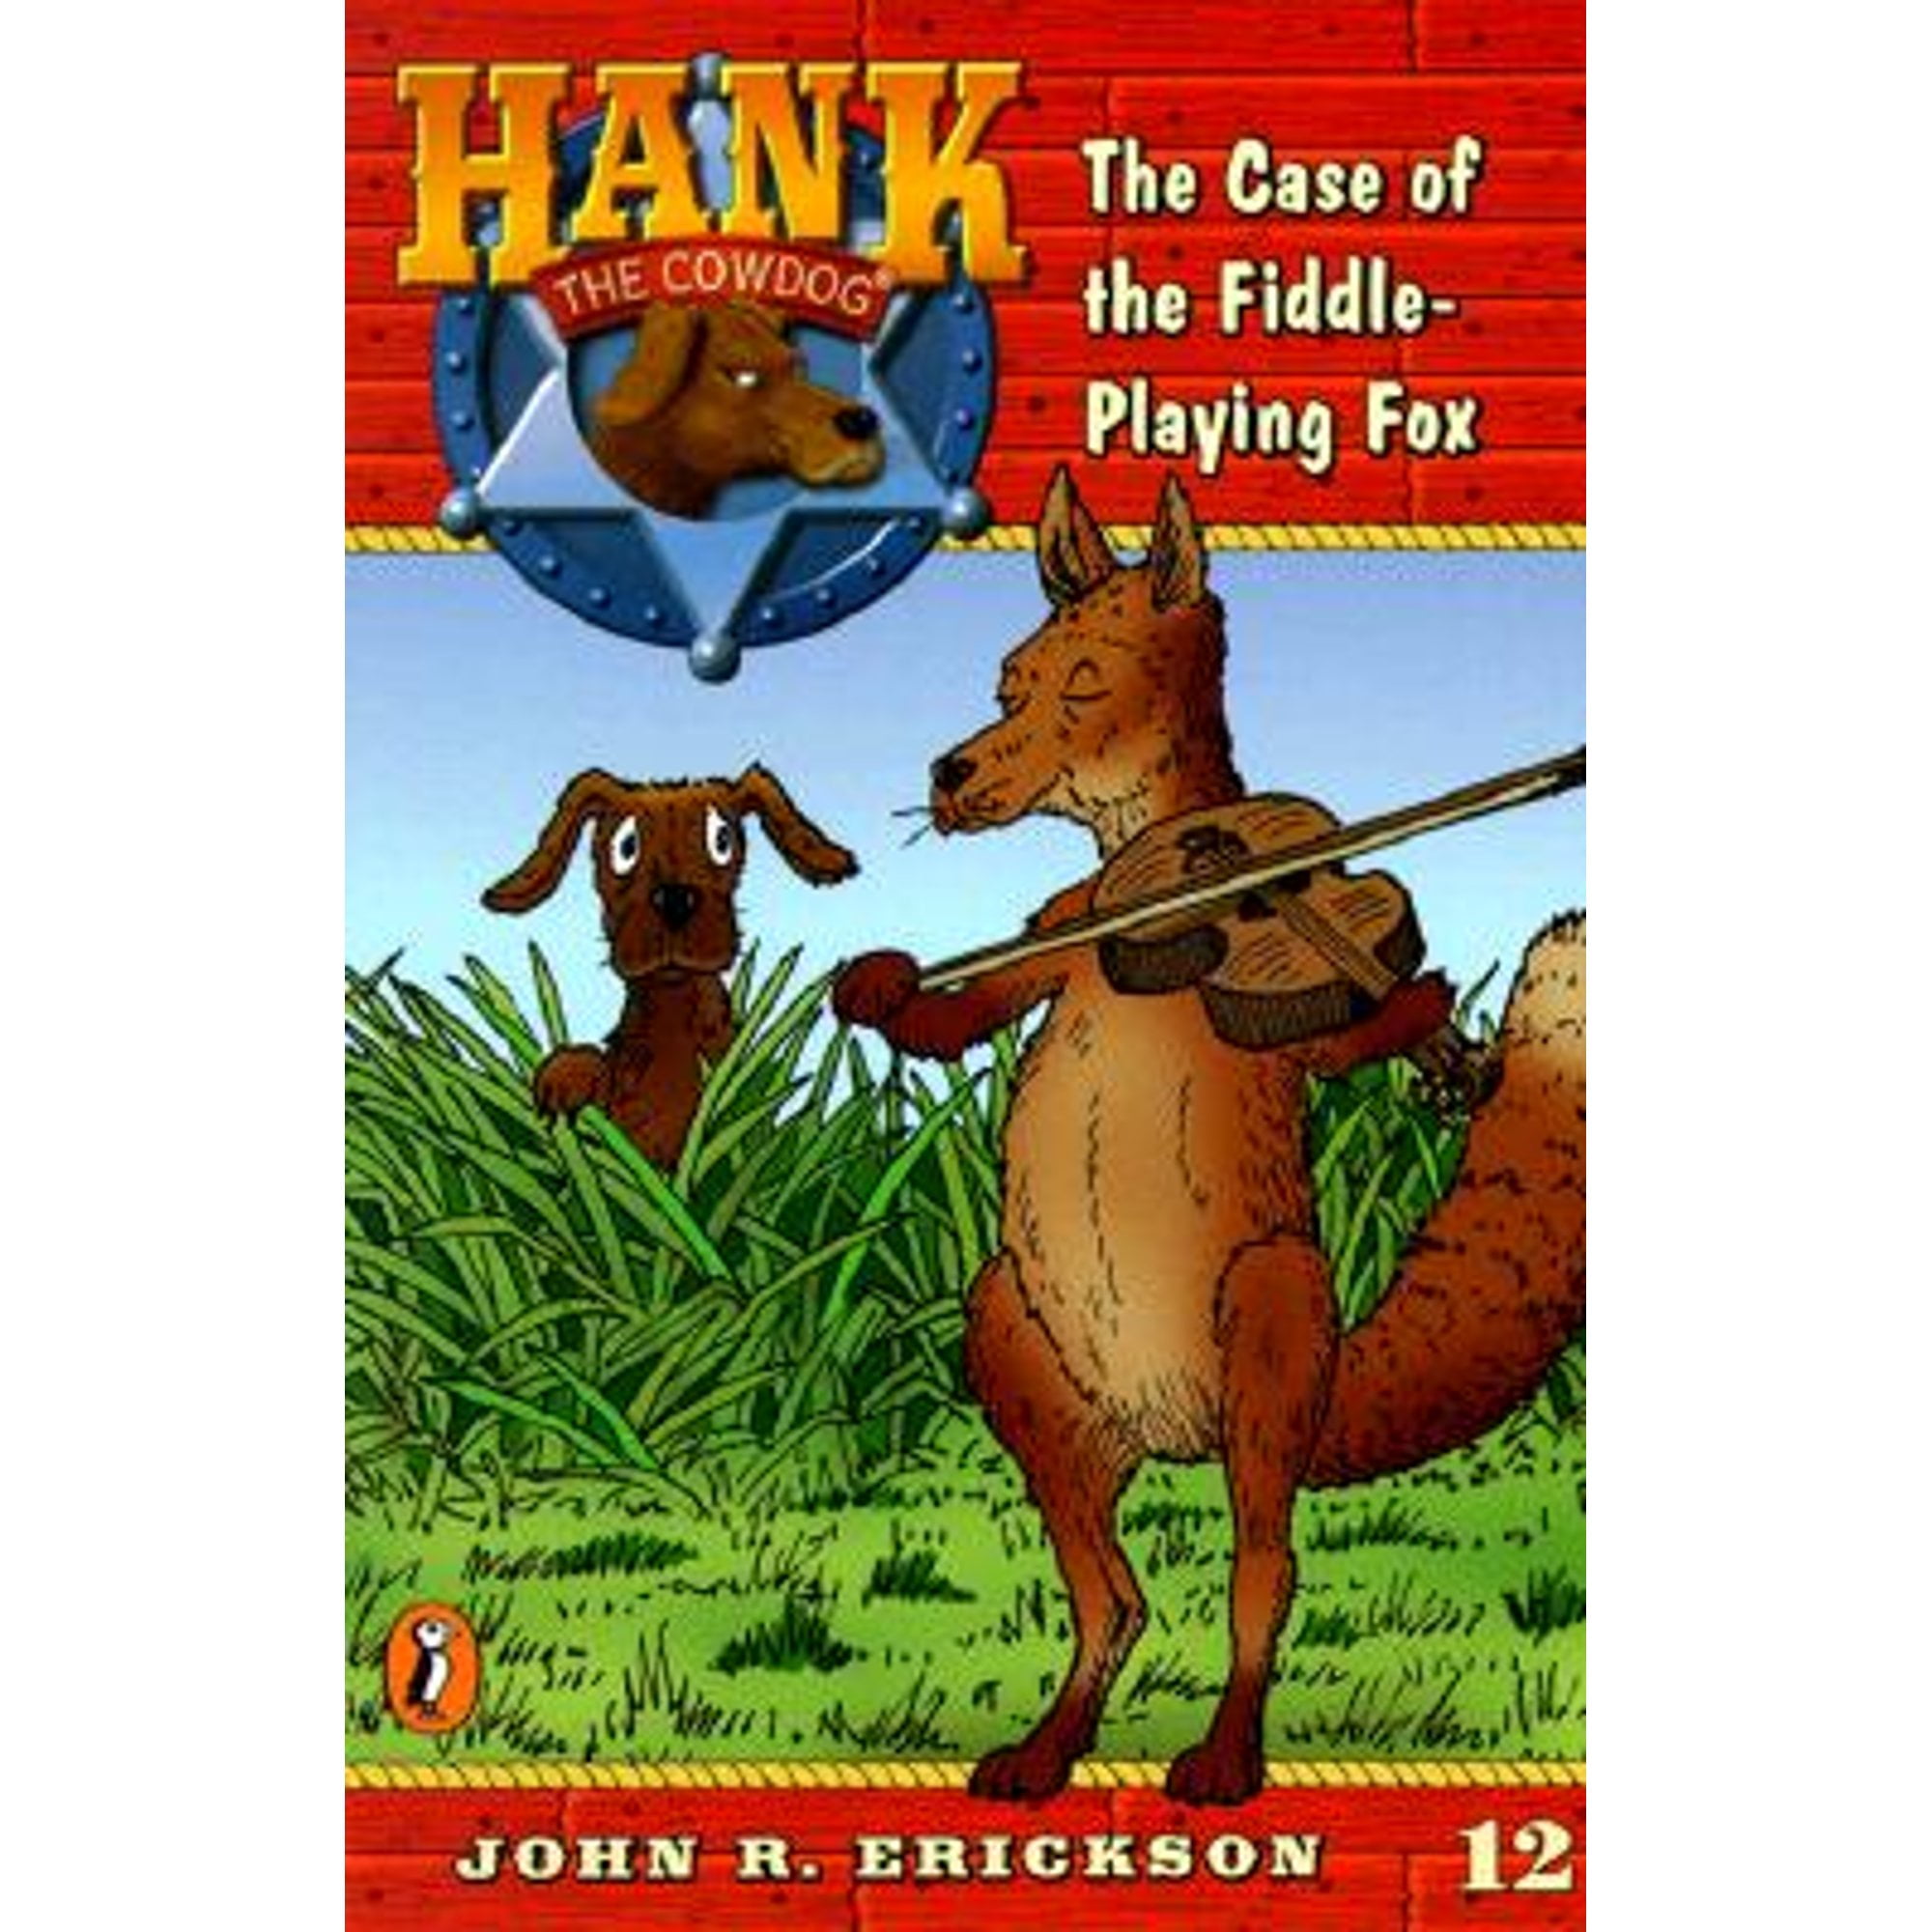 Pre-Owned The Case of the Fiddle-Playing Fox (Paperback 9780141303888) by John R Erickson, Gerald L Holmes